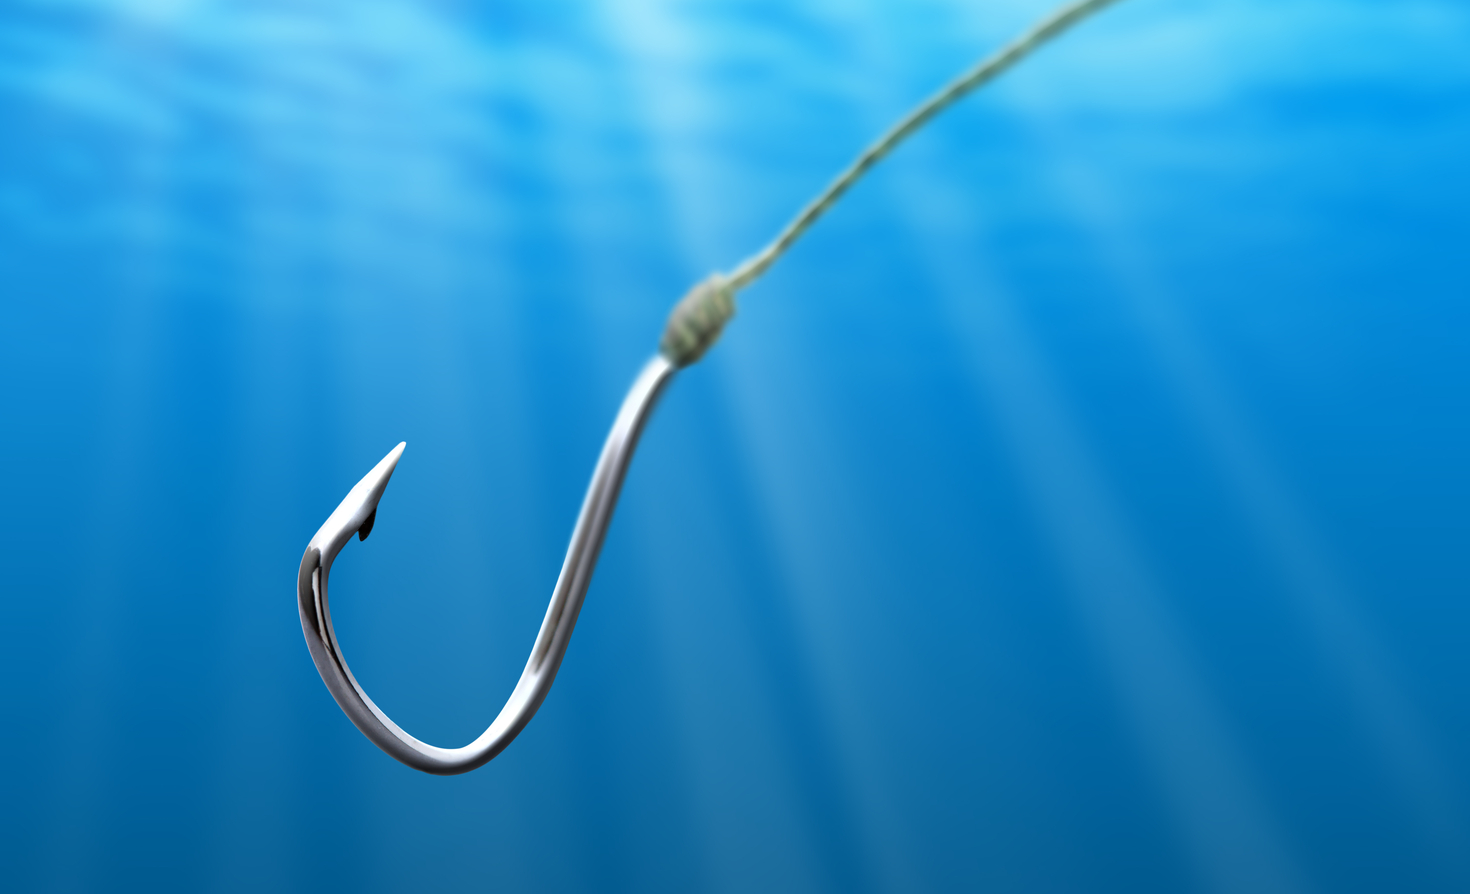 Image of an empty hook in water